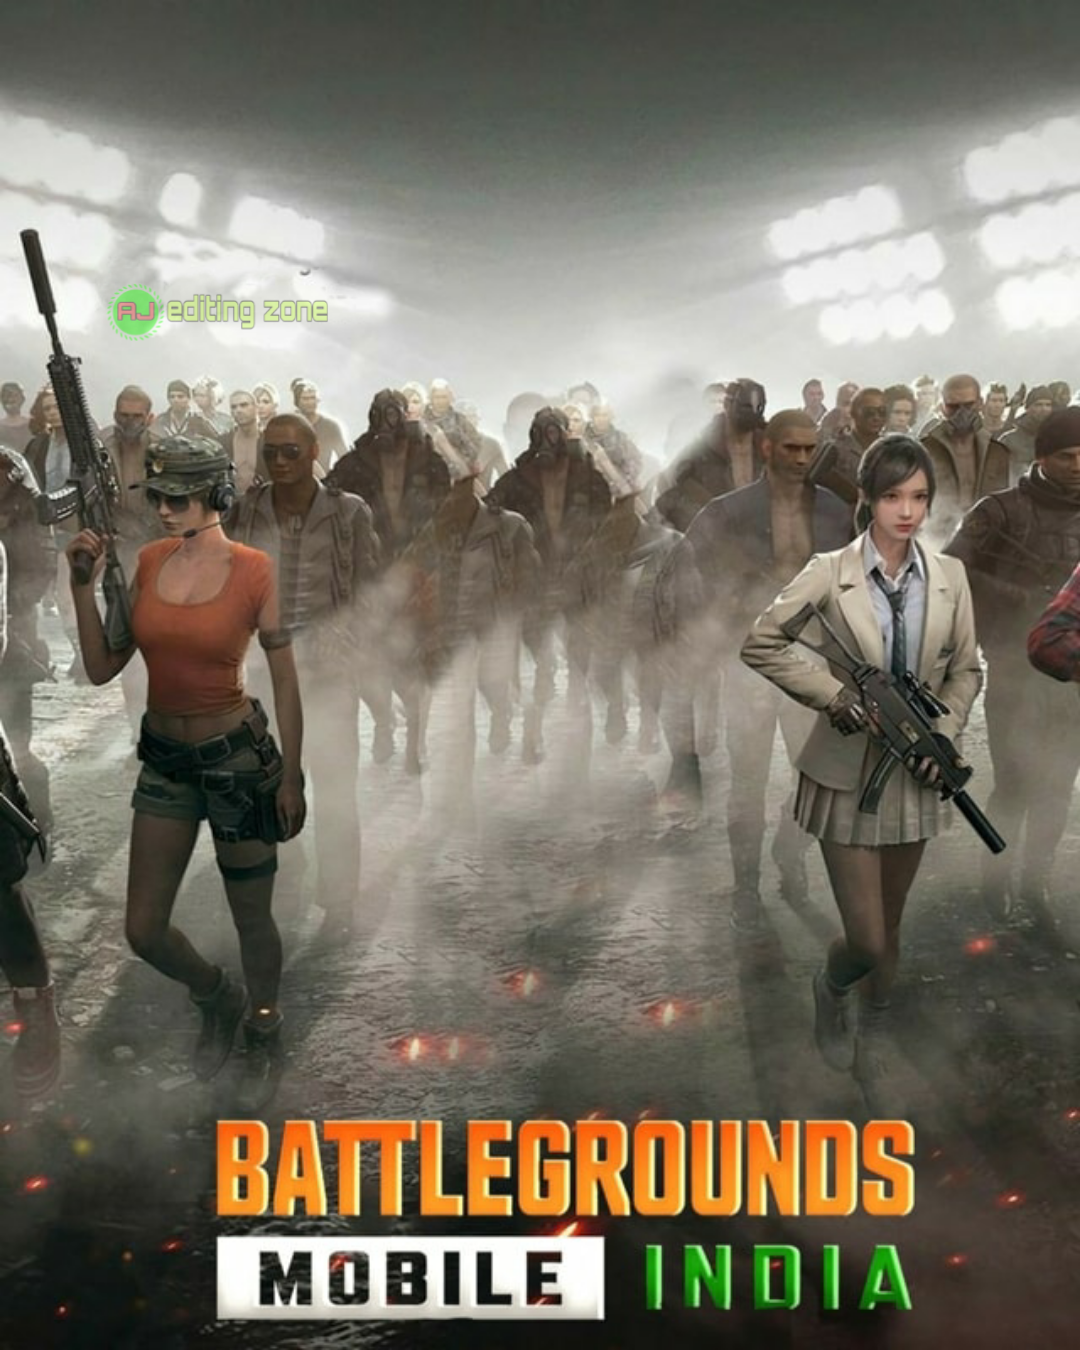 100+ Battleground Mobile India Hd Background Images | PUBG India Photo Editing Backgrounds Download